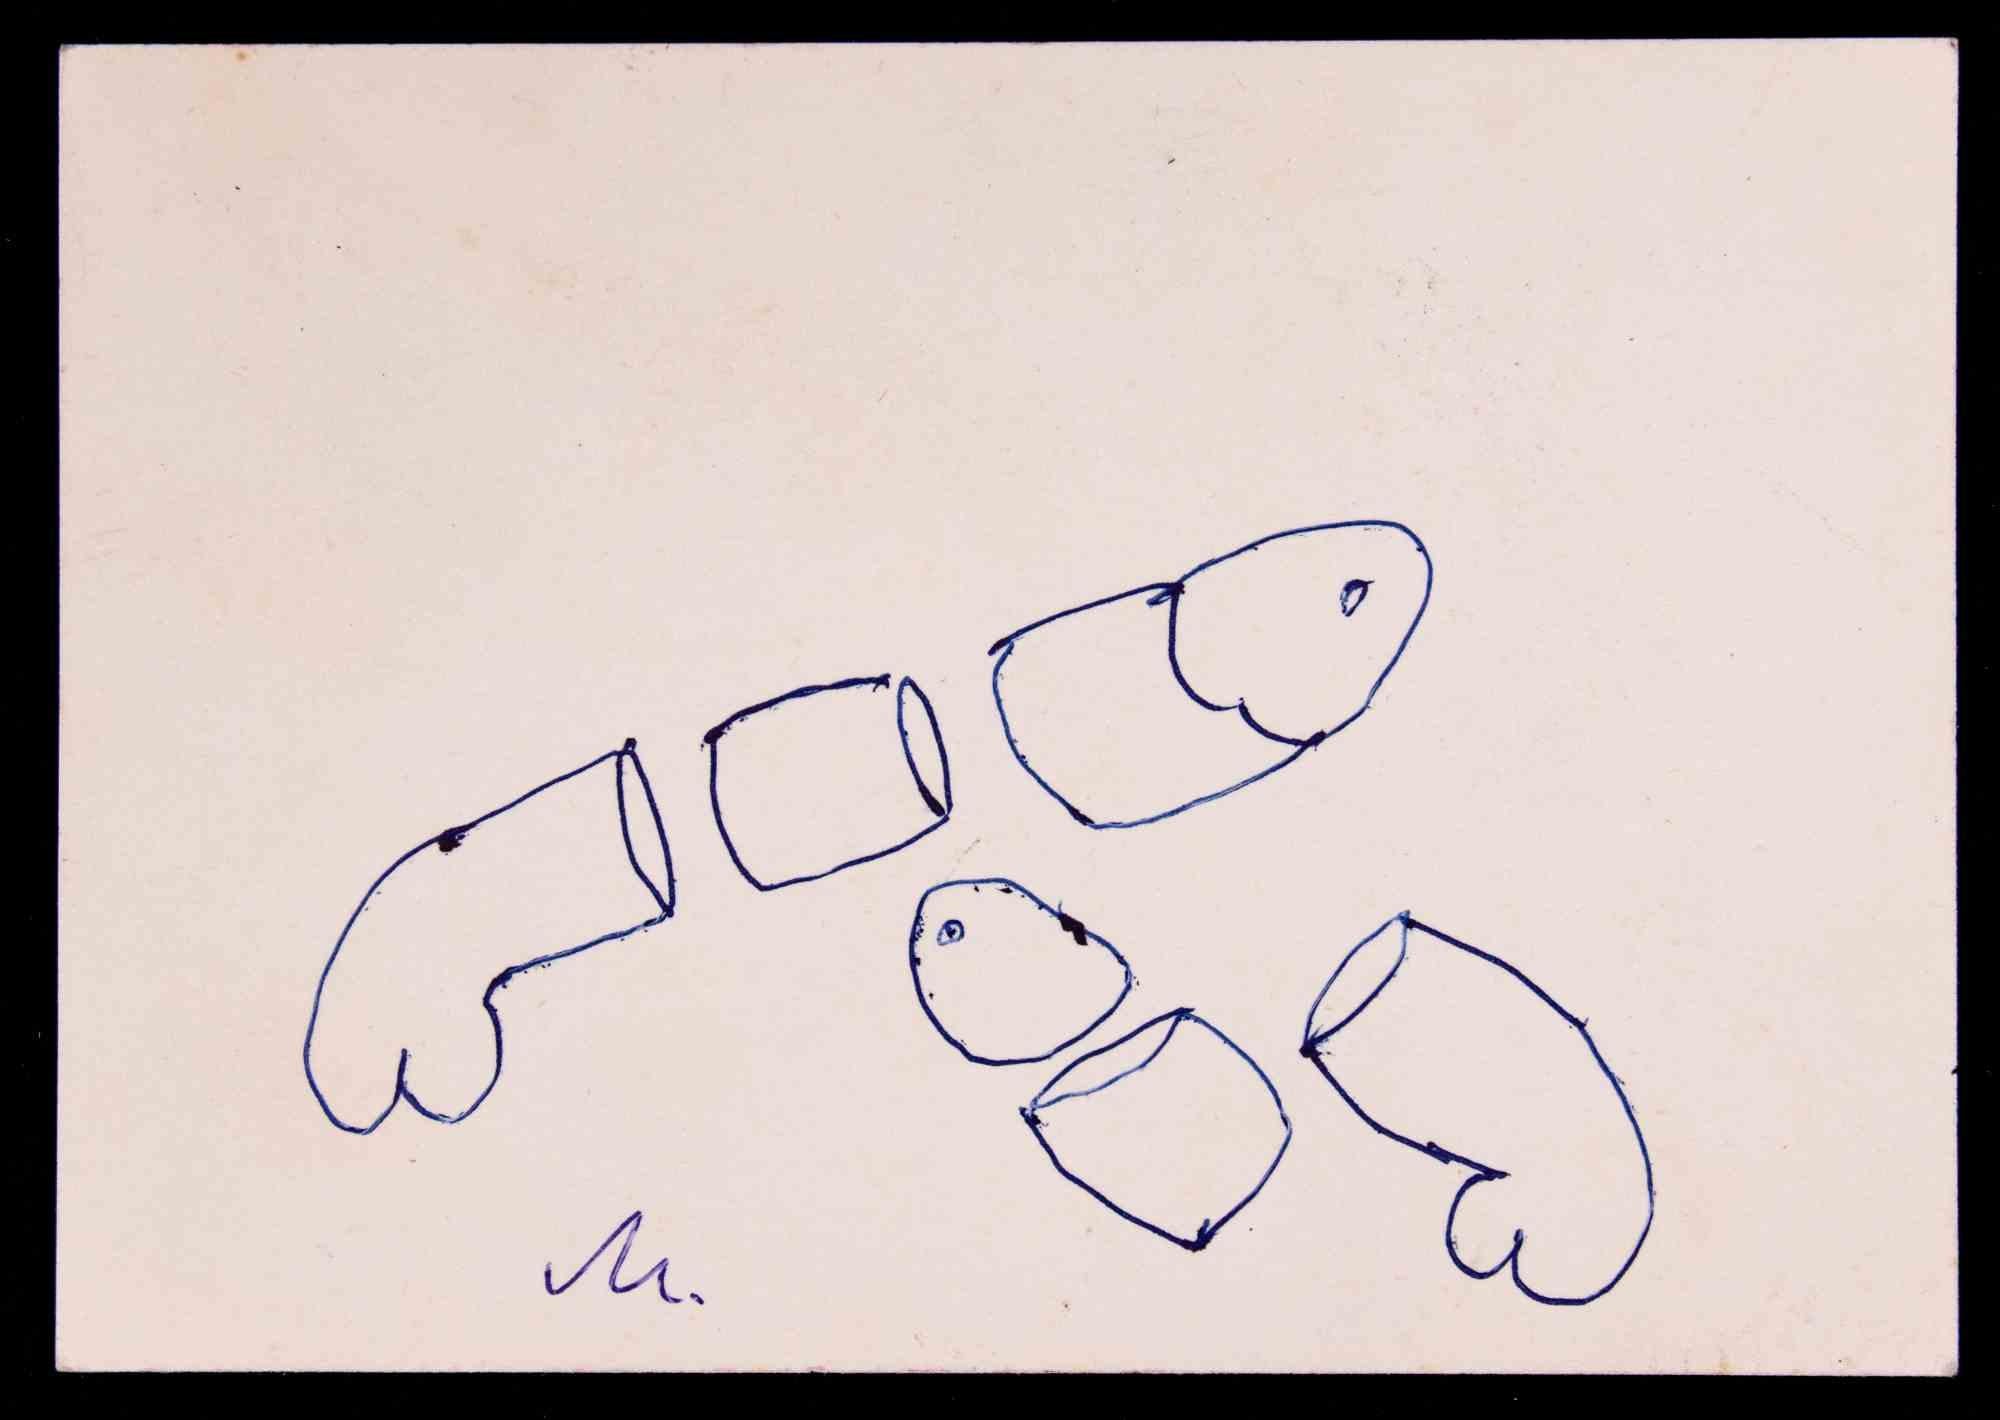 Male Foul is a Pencil Drawing realized by Mino Maccari (1924-1989) in 1960s.

Hand-signed on the lower margin.

Good condition on a little cardboard.

Mino Maccari (Siena, 1924-Rome, June 16, 1989) was an Italian writer, painter, engraver and